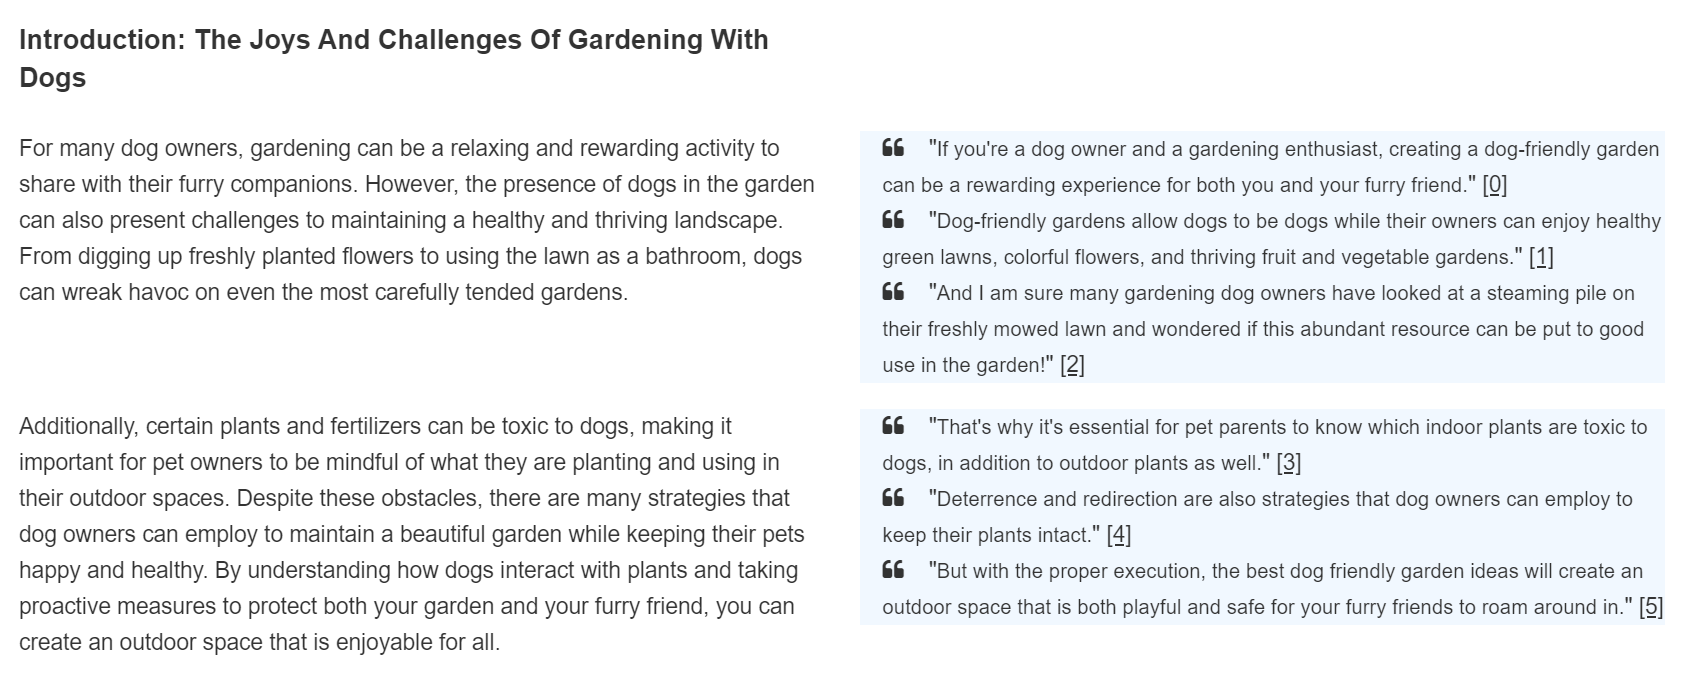 AI Writer Article Generator - "Maintaining a Healthy Garden When You Have Dogs" 